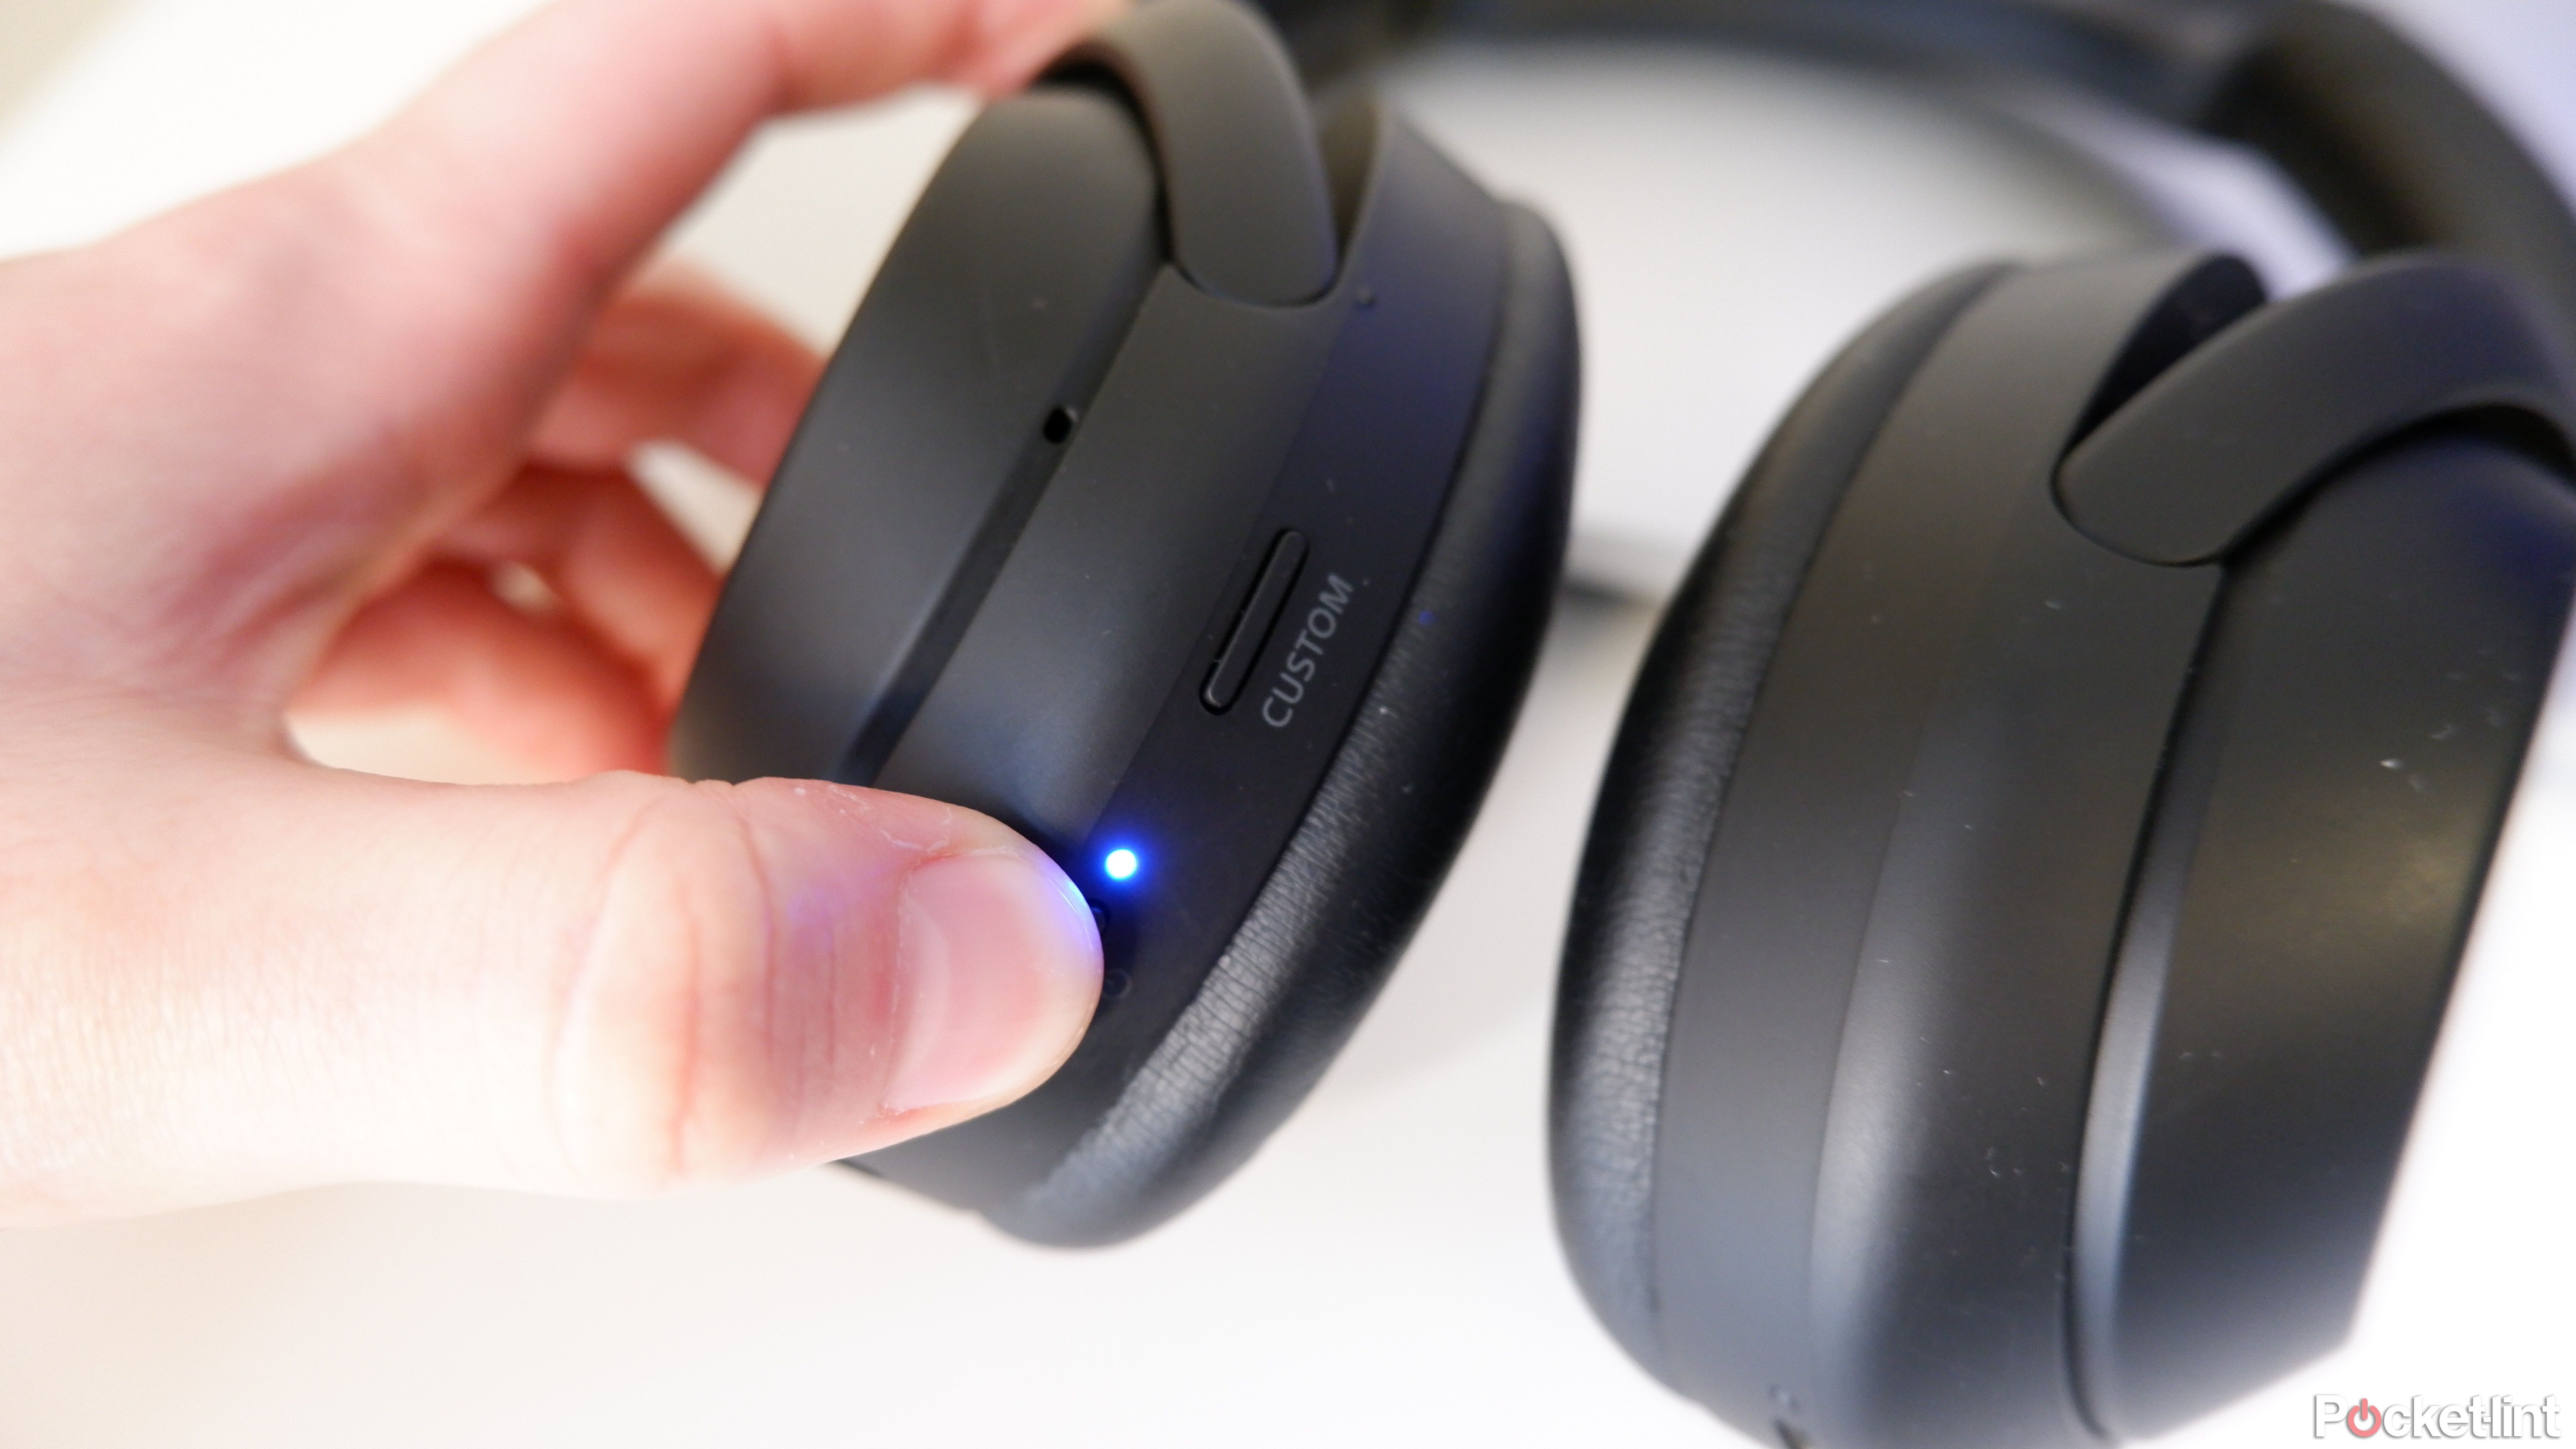 The Sony WH-1000XM4 in Bluetooth pairing mode, with a thumb holding down the power button and a blue LED on.